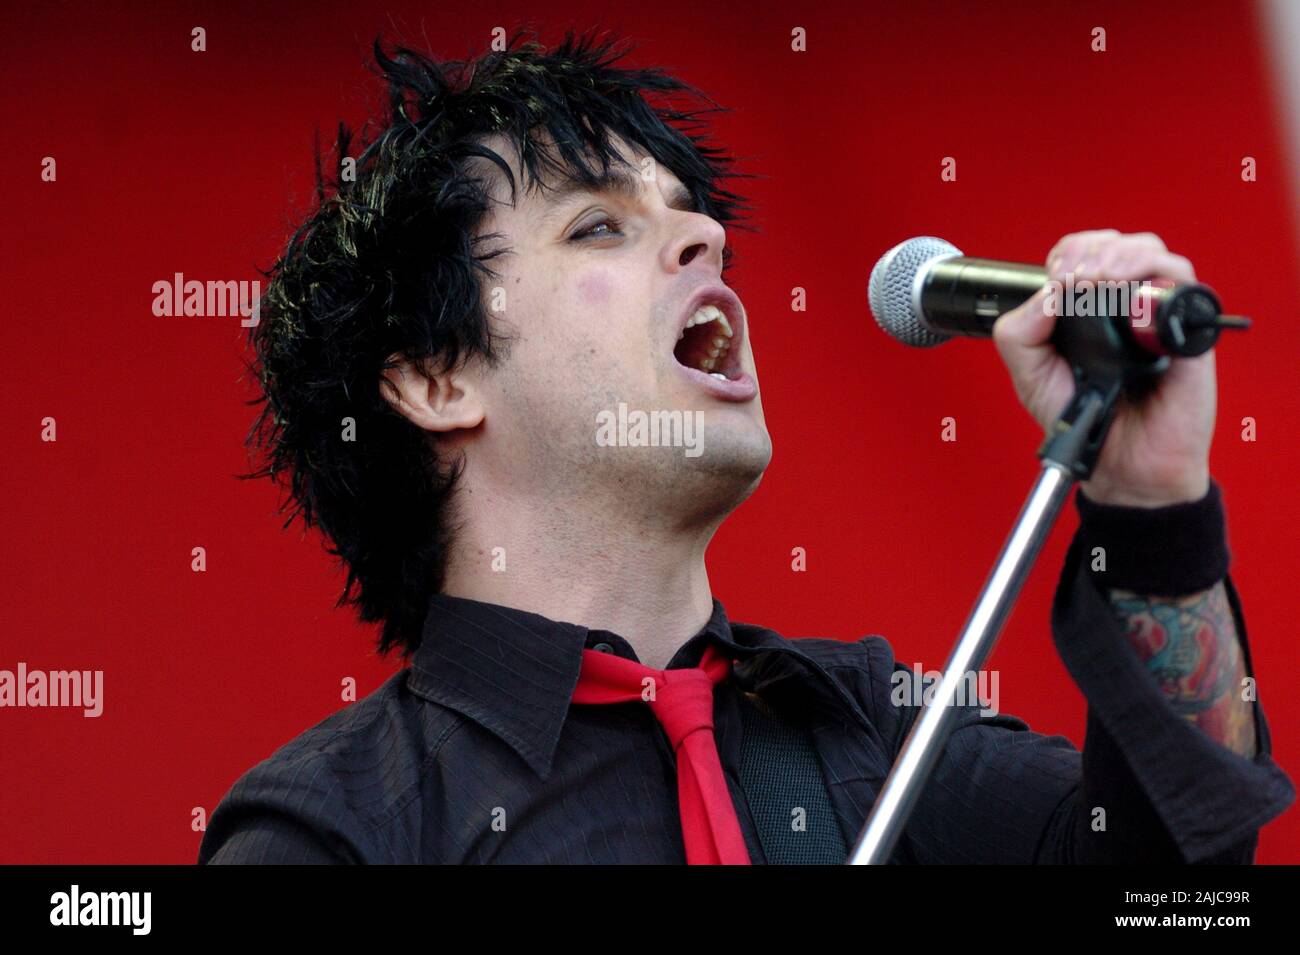 Italy Imola , 10-11-12 June 2005 'Heineken Jammin Festival 2005' Autodromo di Imola: The Green Day singer and guitarist, Billie Joe Armstrong, during the concert Stock Photo